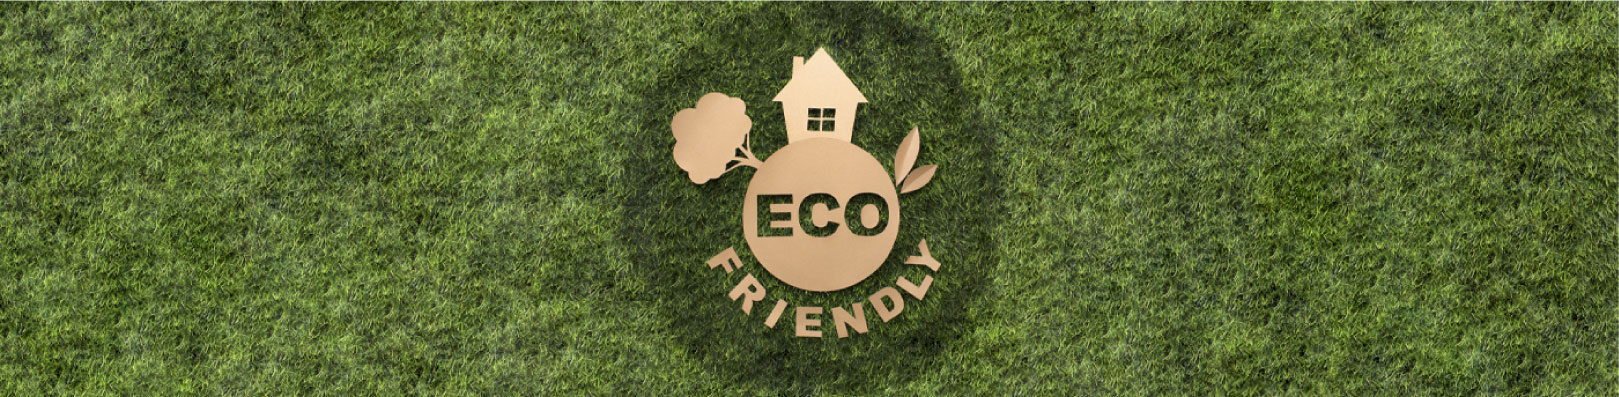 Eco friendly gift items in Germany | Eco friendly giveaways in Germany with HMi advertising agency | Eco friendly advertising products in Germany at hmi